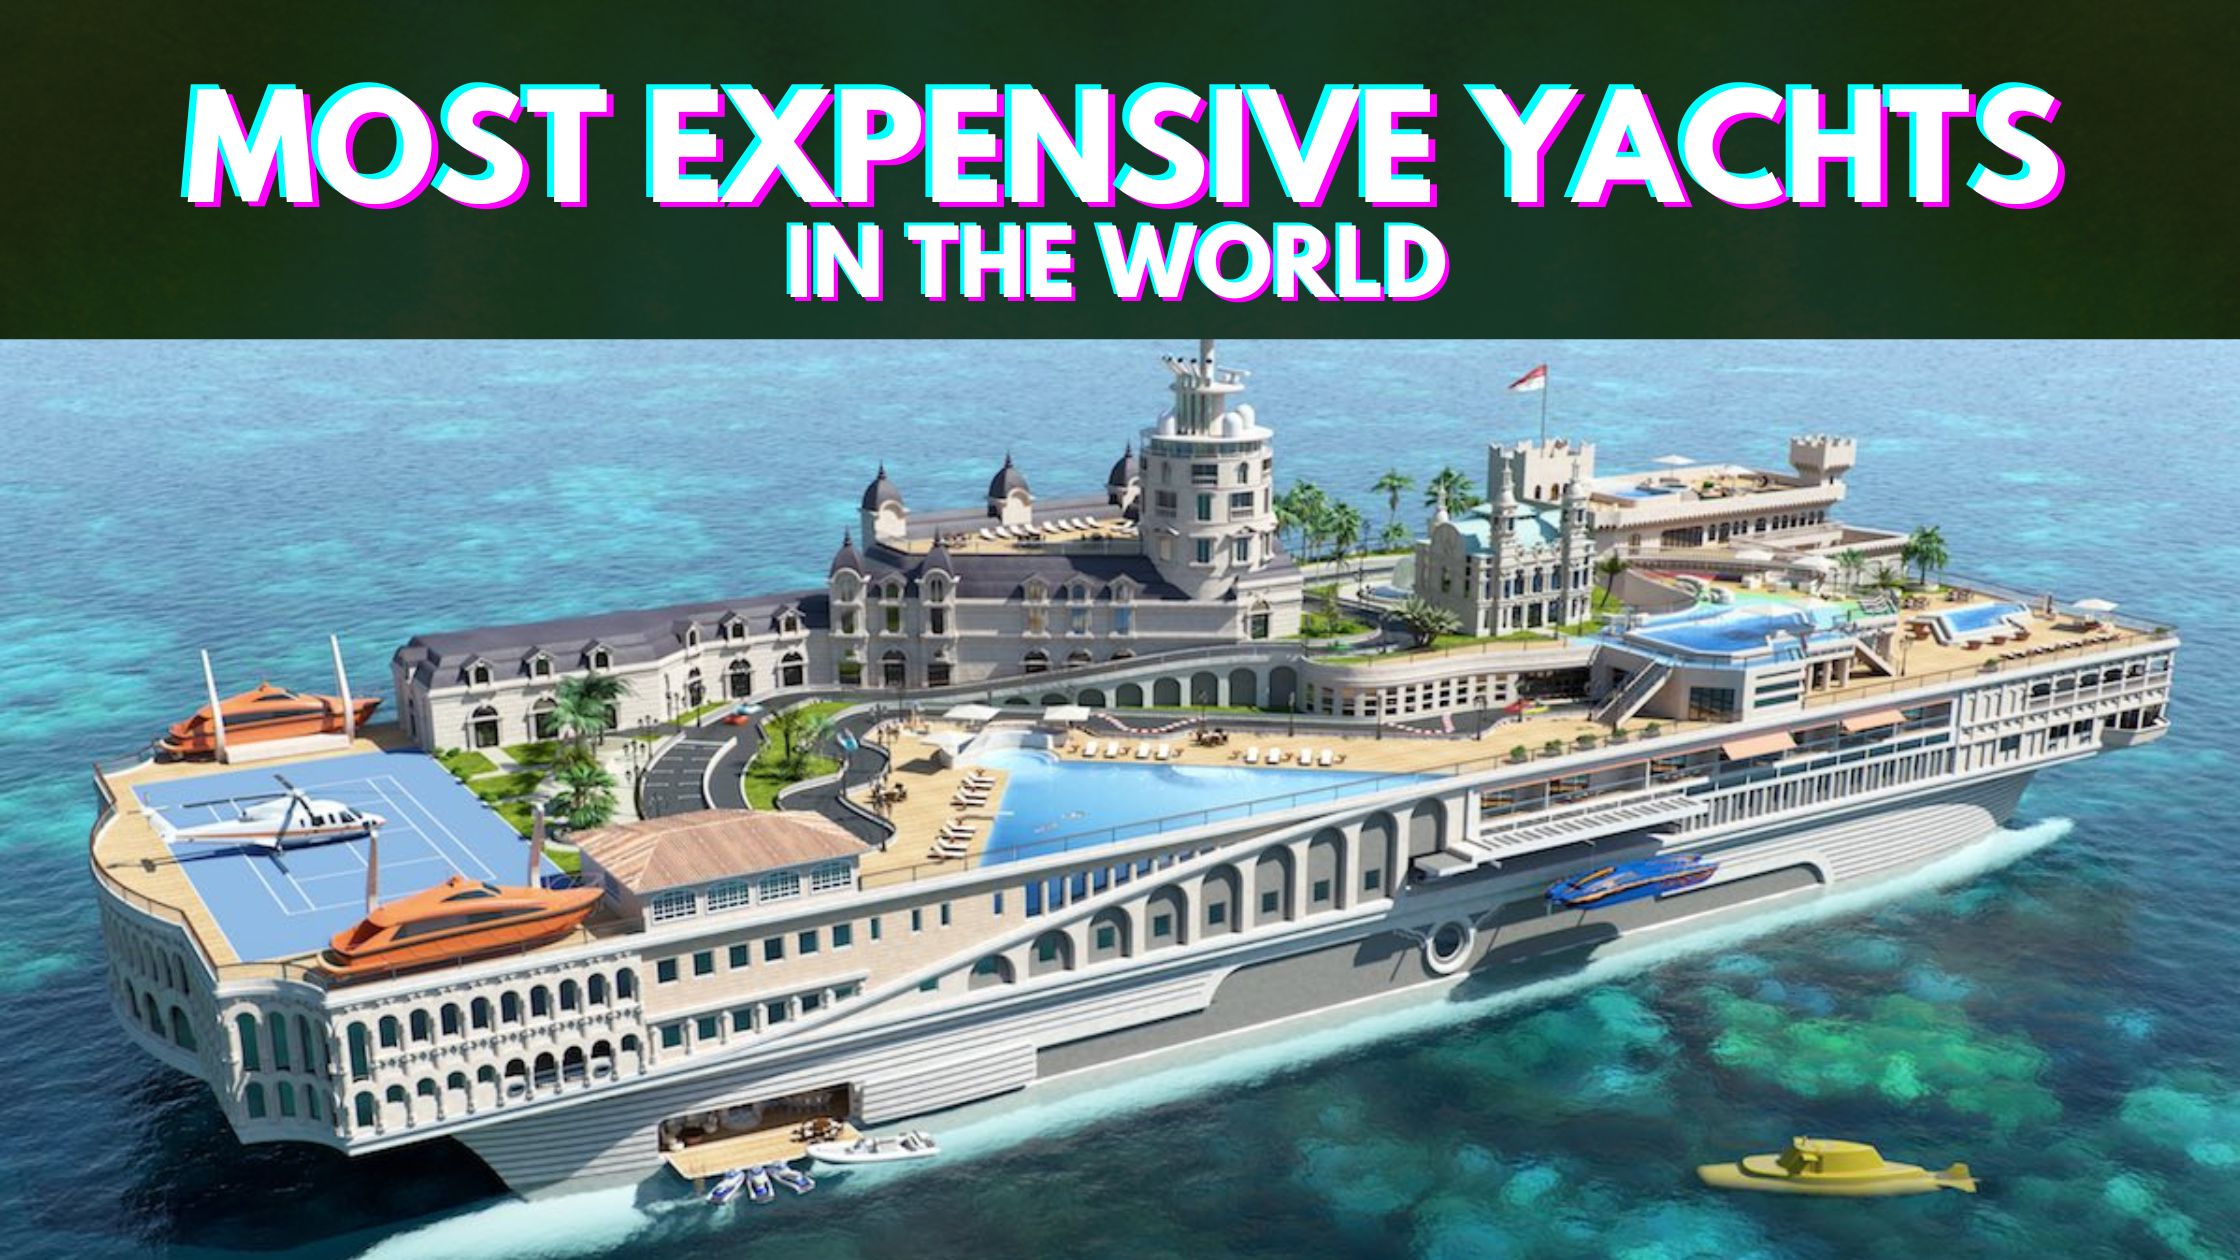 Most Expensive Yachts In The World